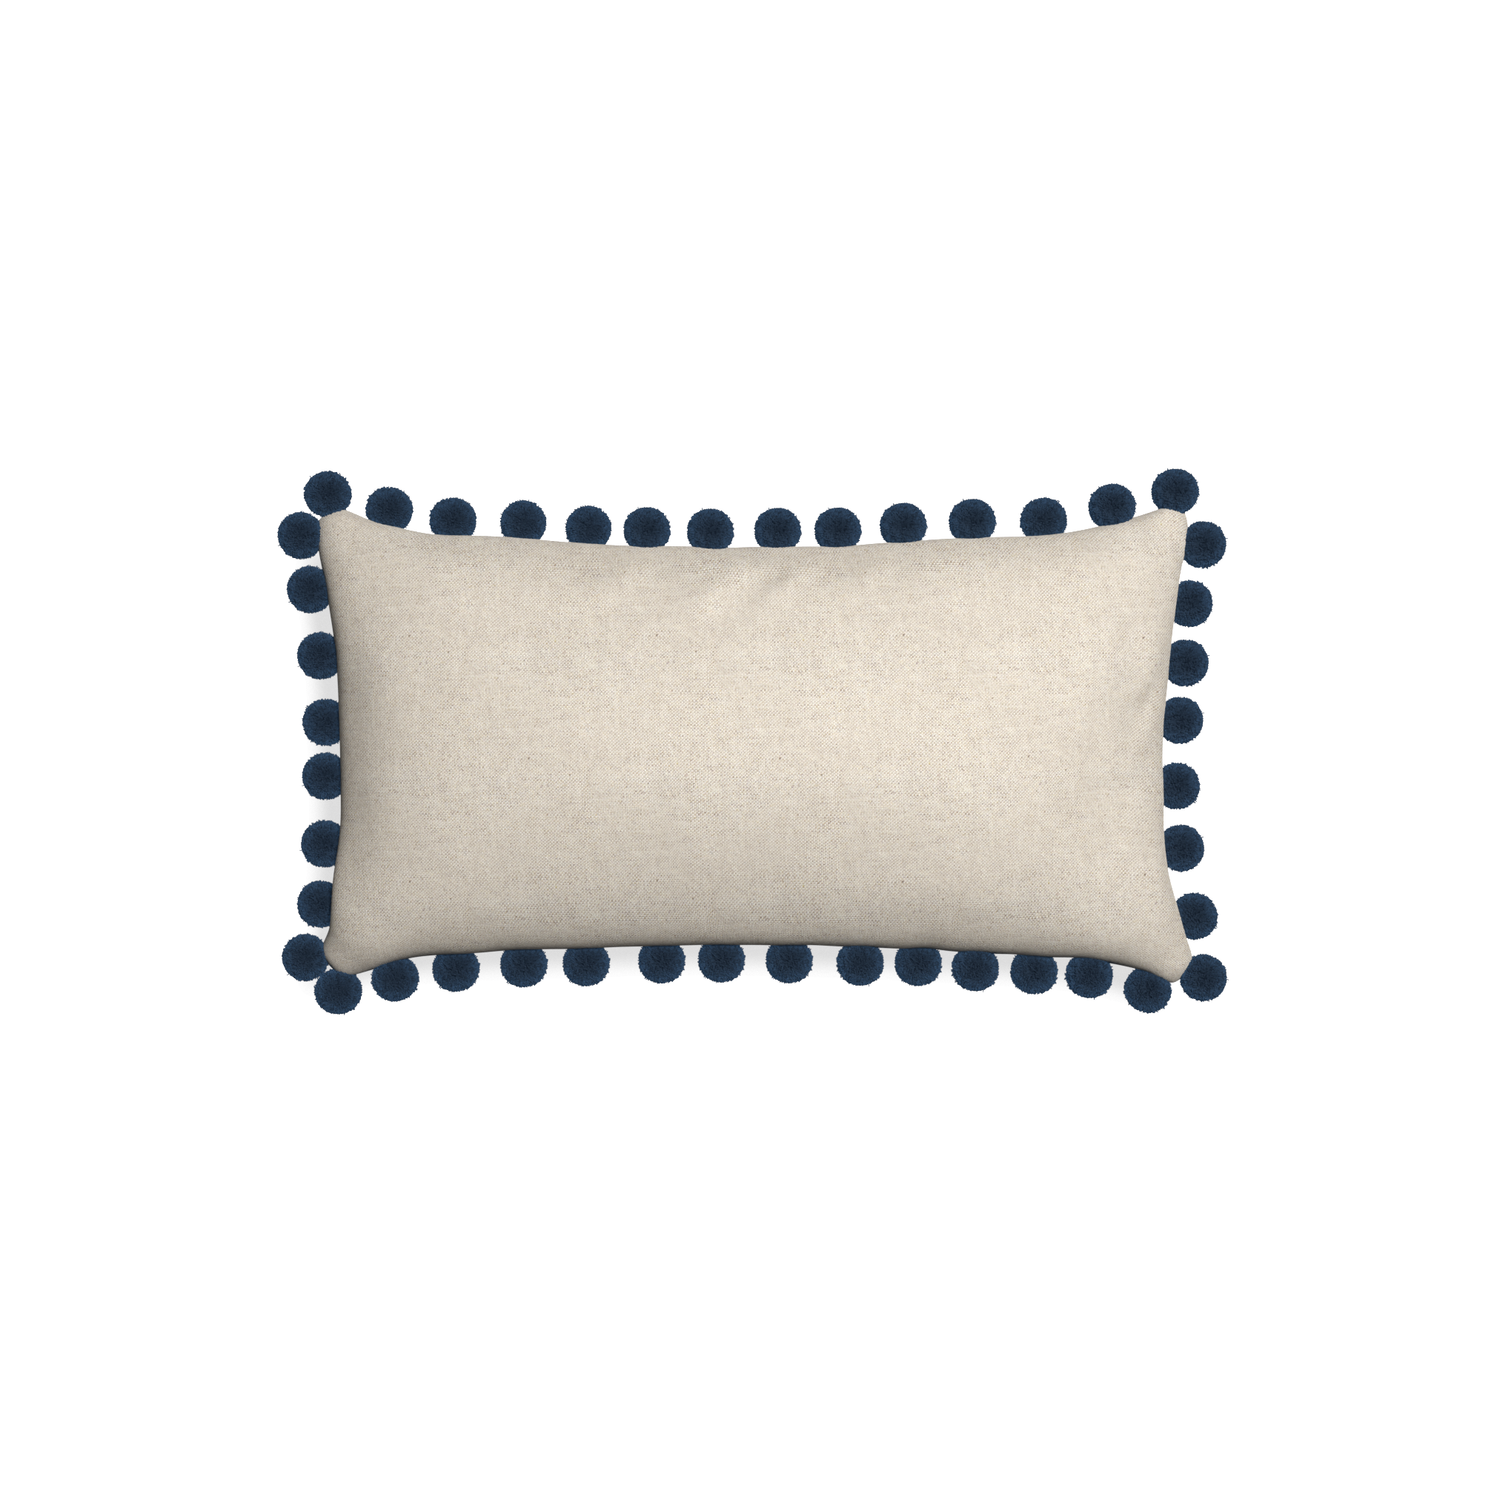 Petite-lumbar oat custom light brownpillow with c on white background